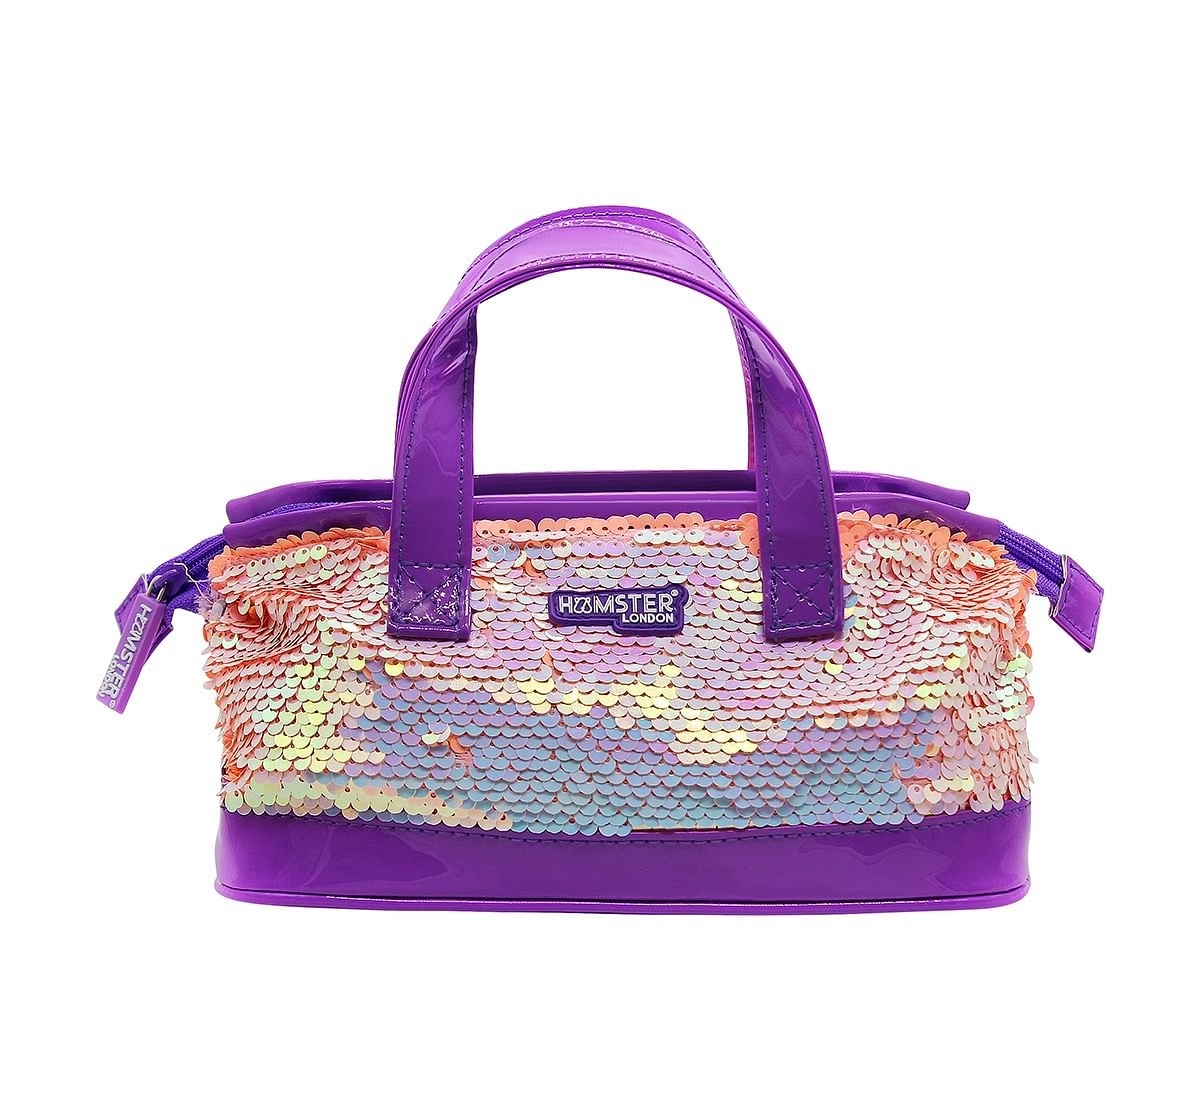 FunBlast Stylish and Fancy Miniature Sequin Bag for Girls Purple Online in  India, Buy at Best Price from Firstcry.com - 15455206